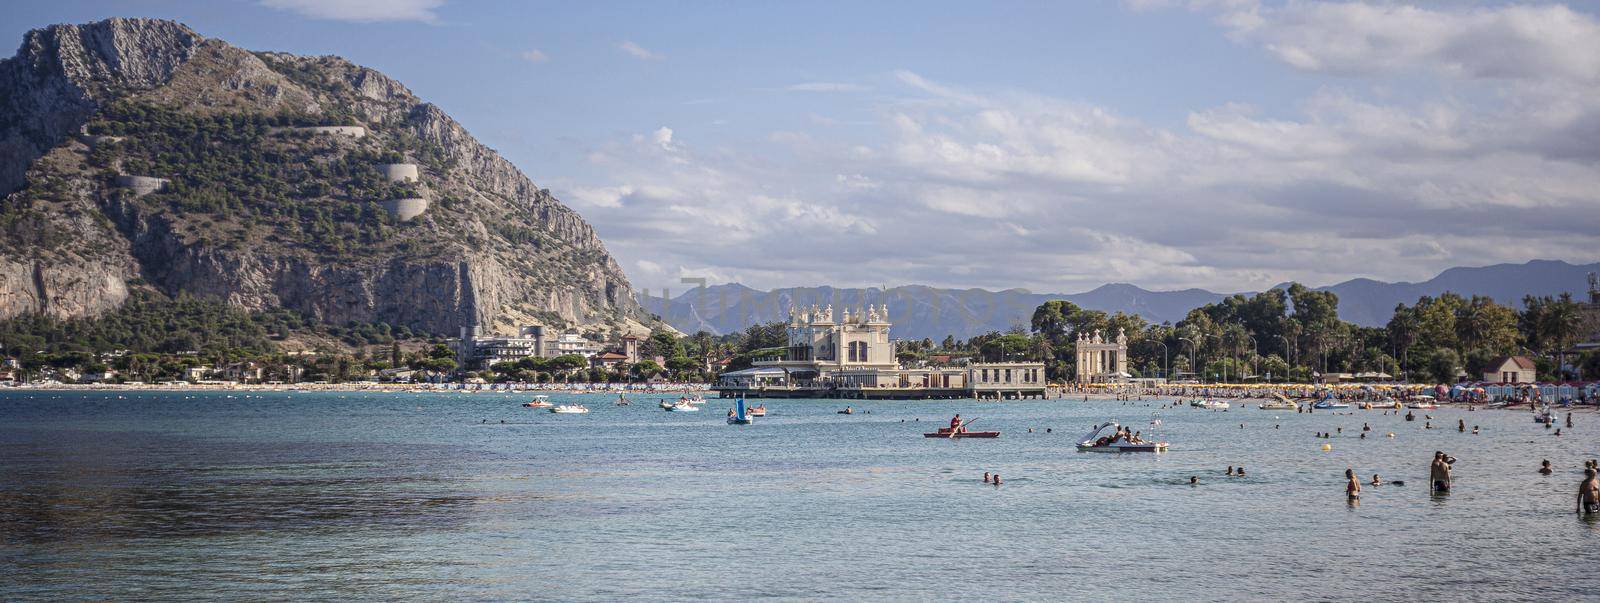 Mondello beach view, banner image with copy space